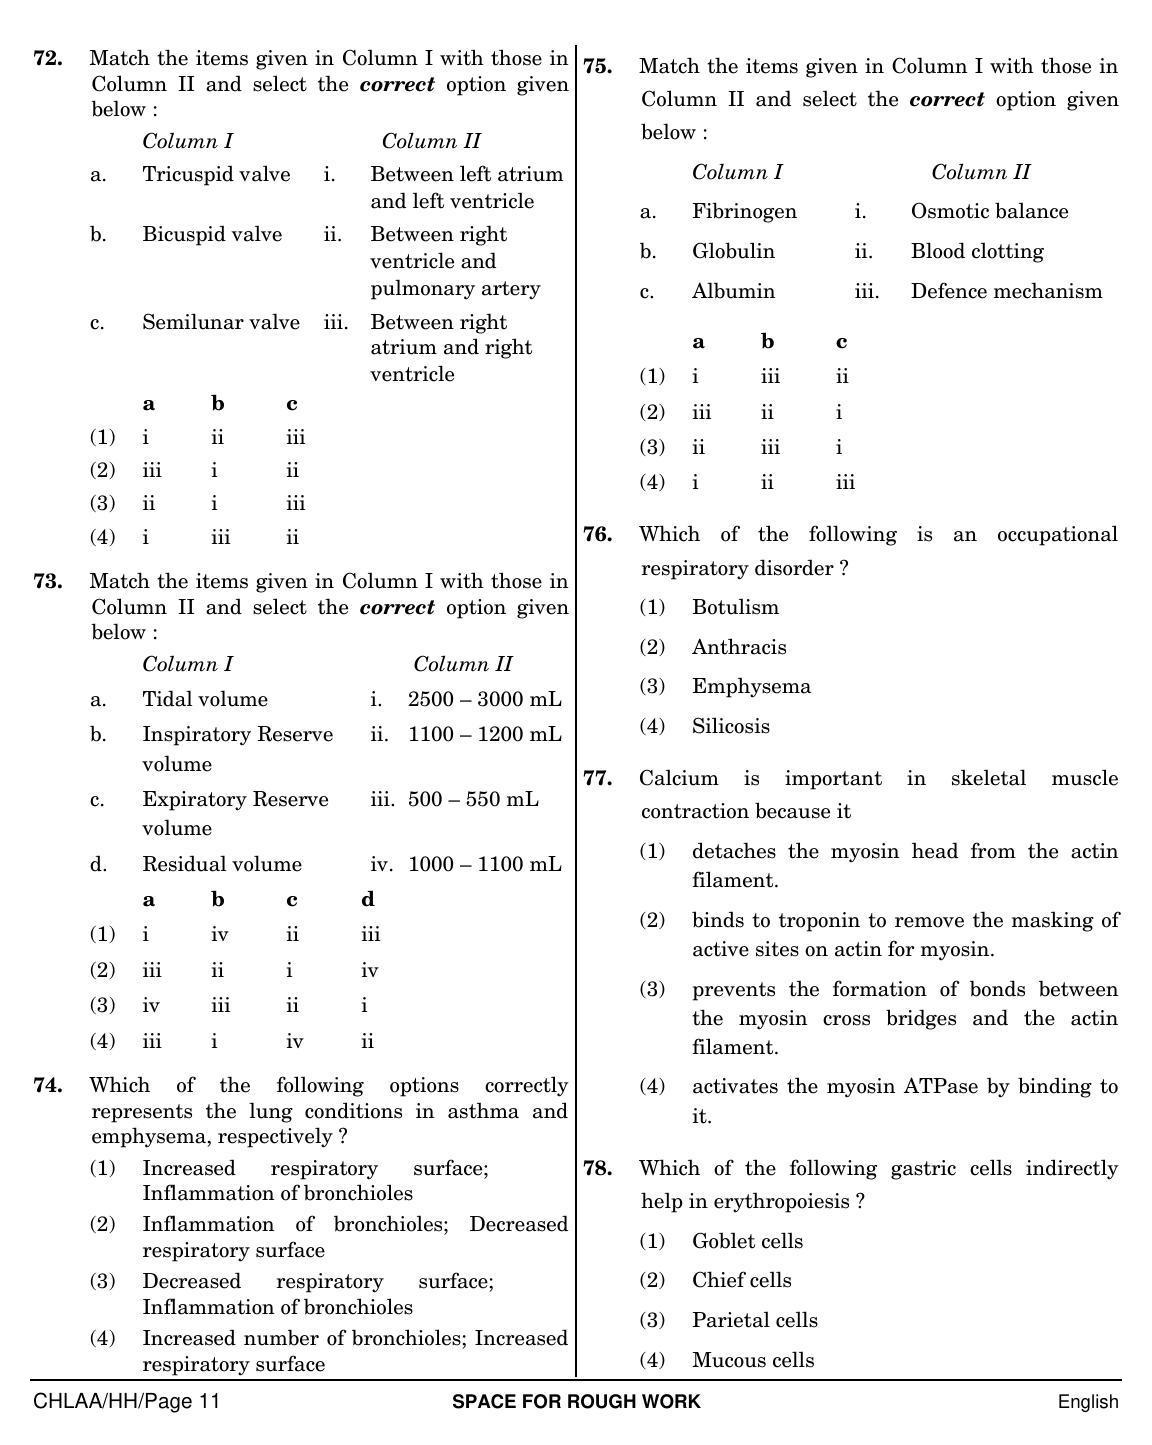 NEET English HH 2019 Question Paper - Page 11